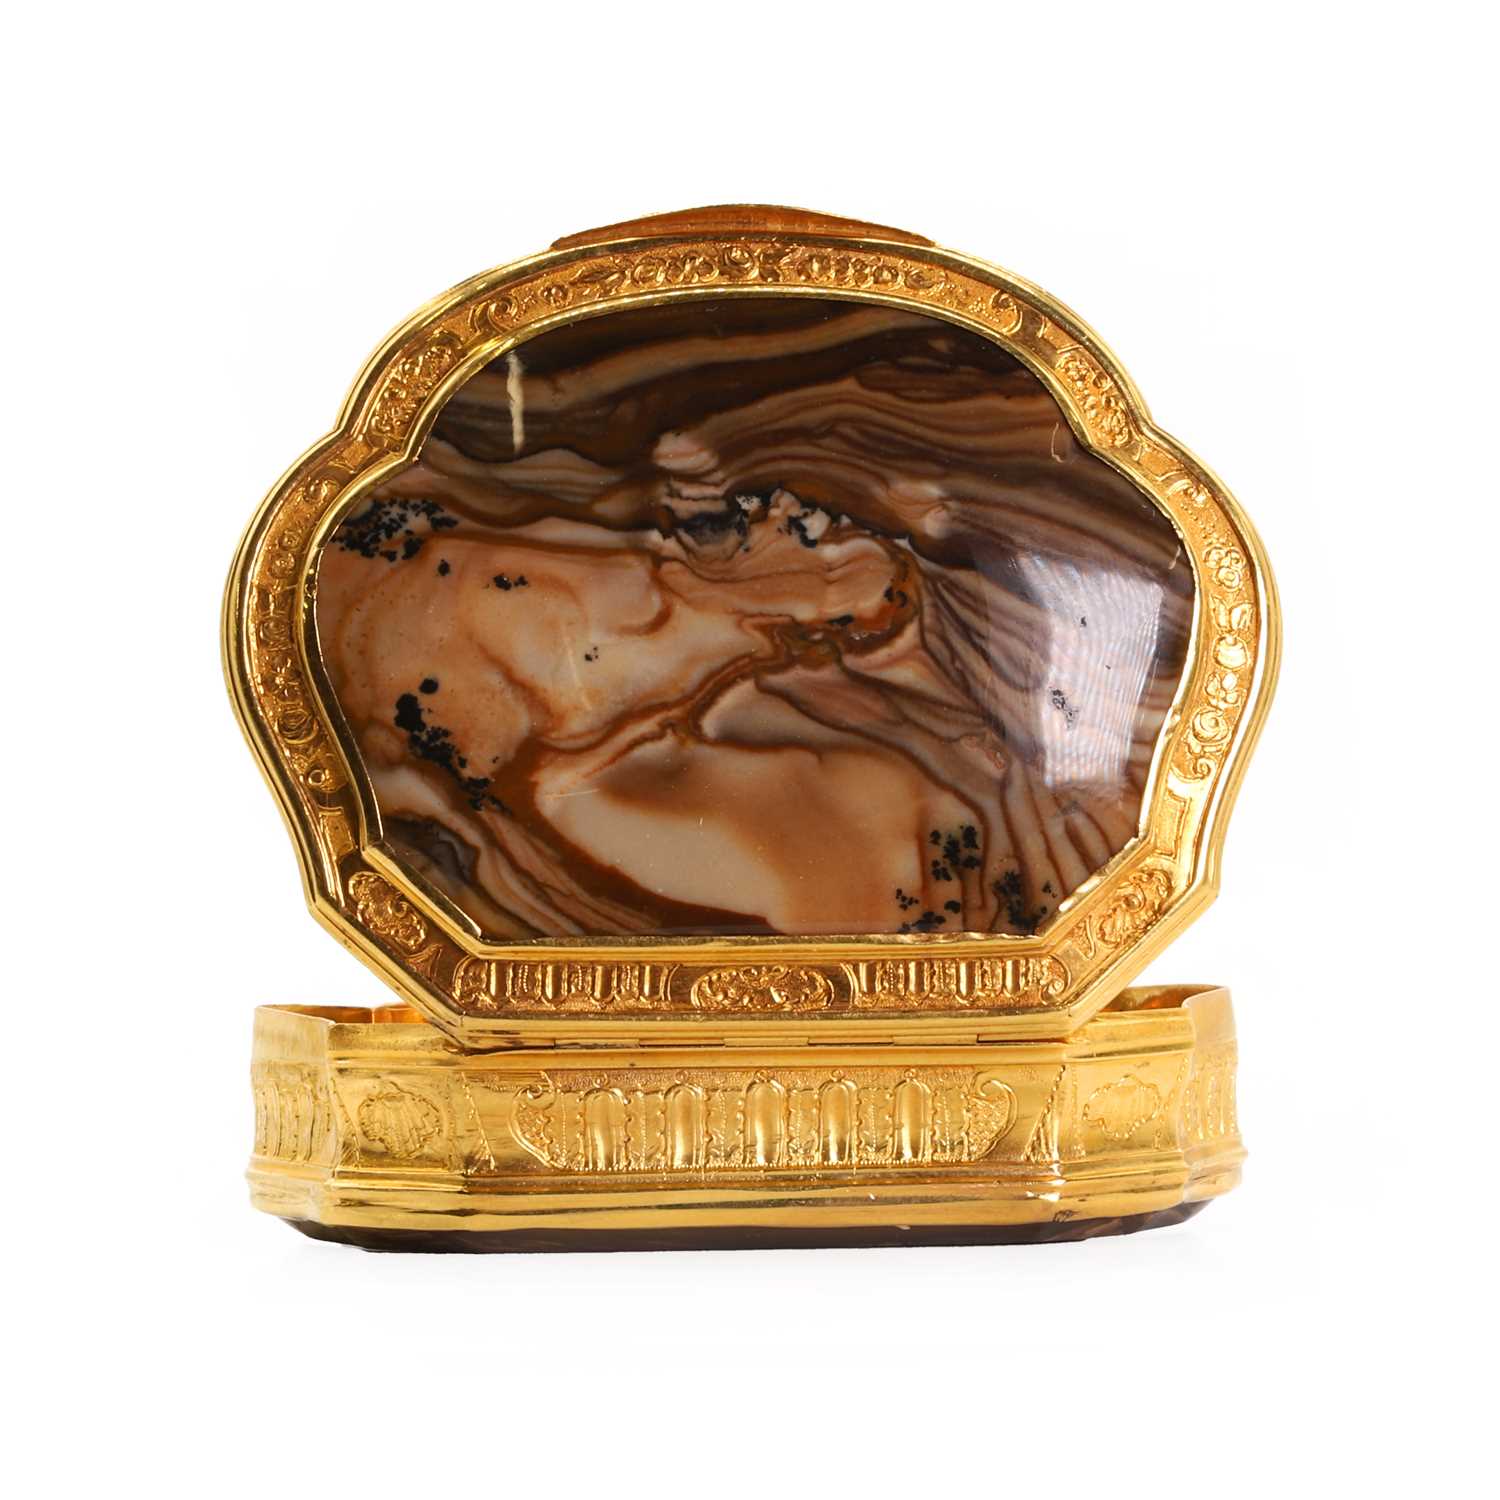 A gold mounted petrified wood snuffbox, late 18th century, - Image 5 of 5